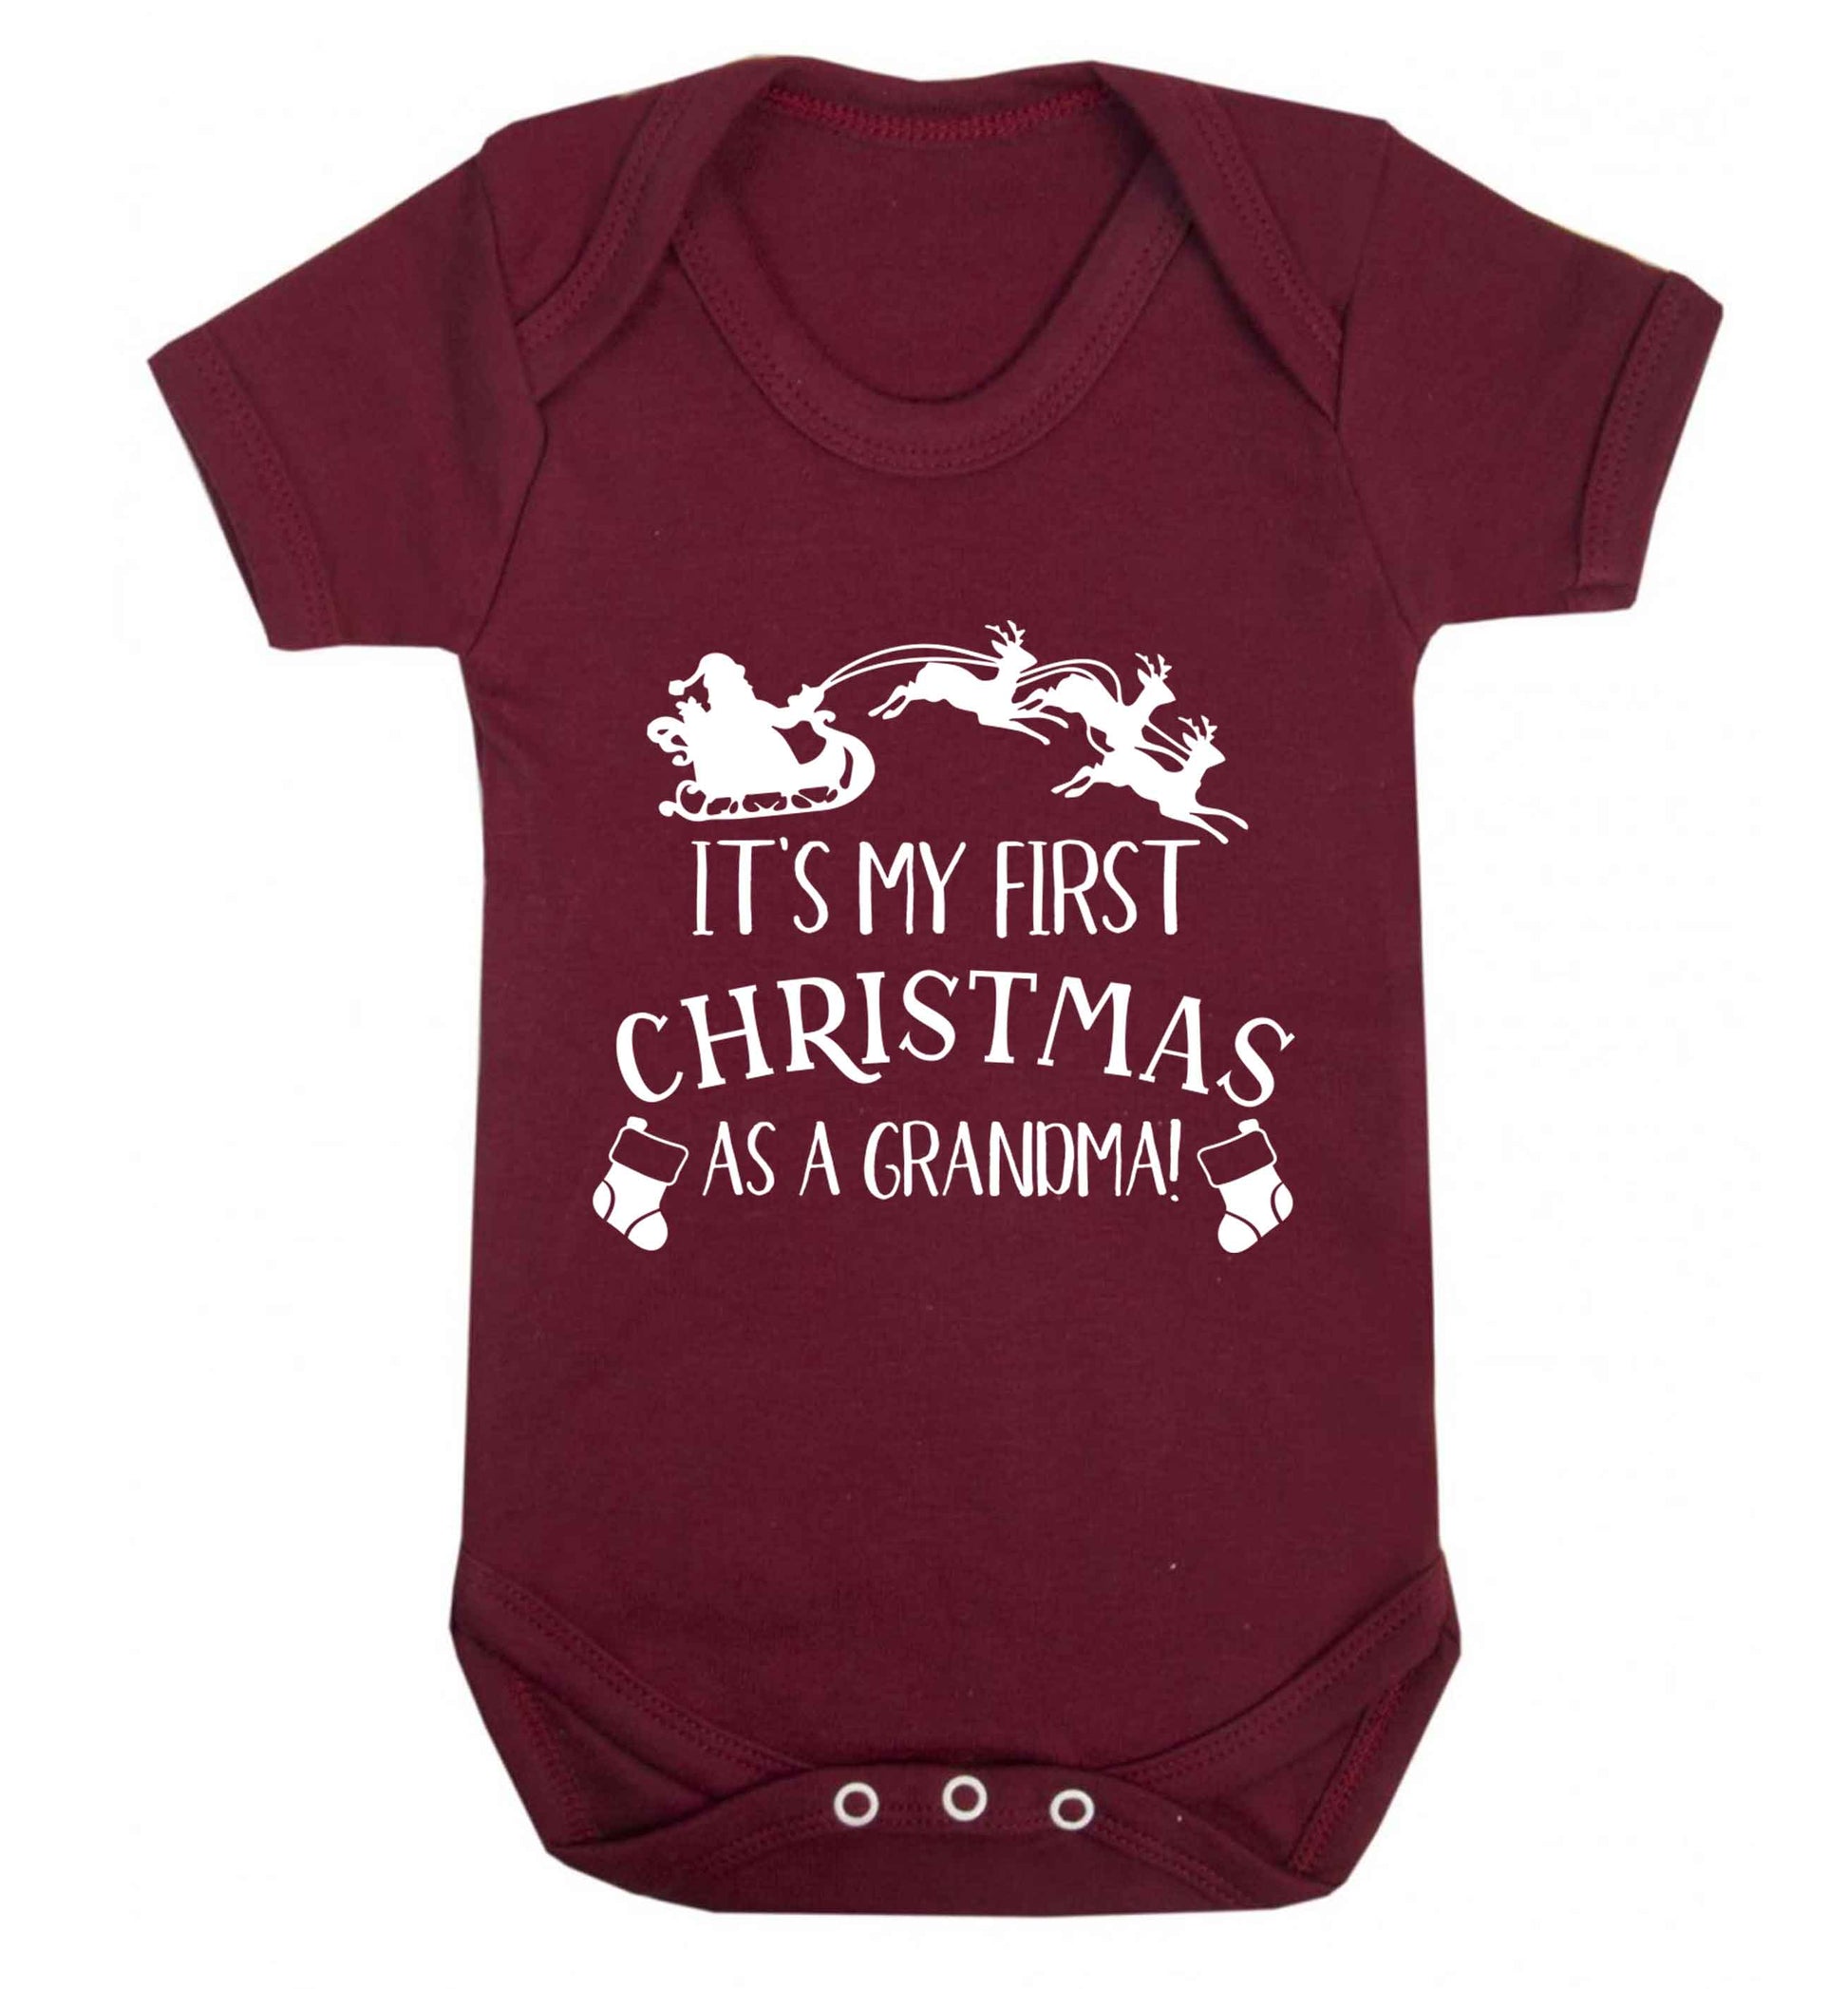 It's my first Christmas as a grandma! Baby Vest maroon 18-24 months